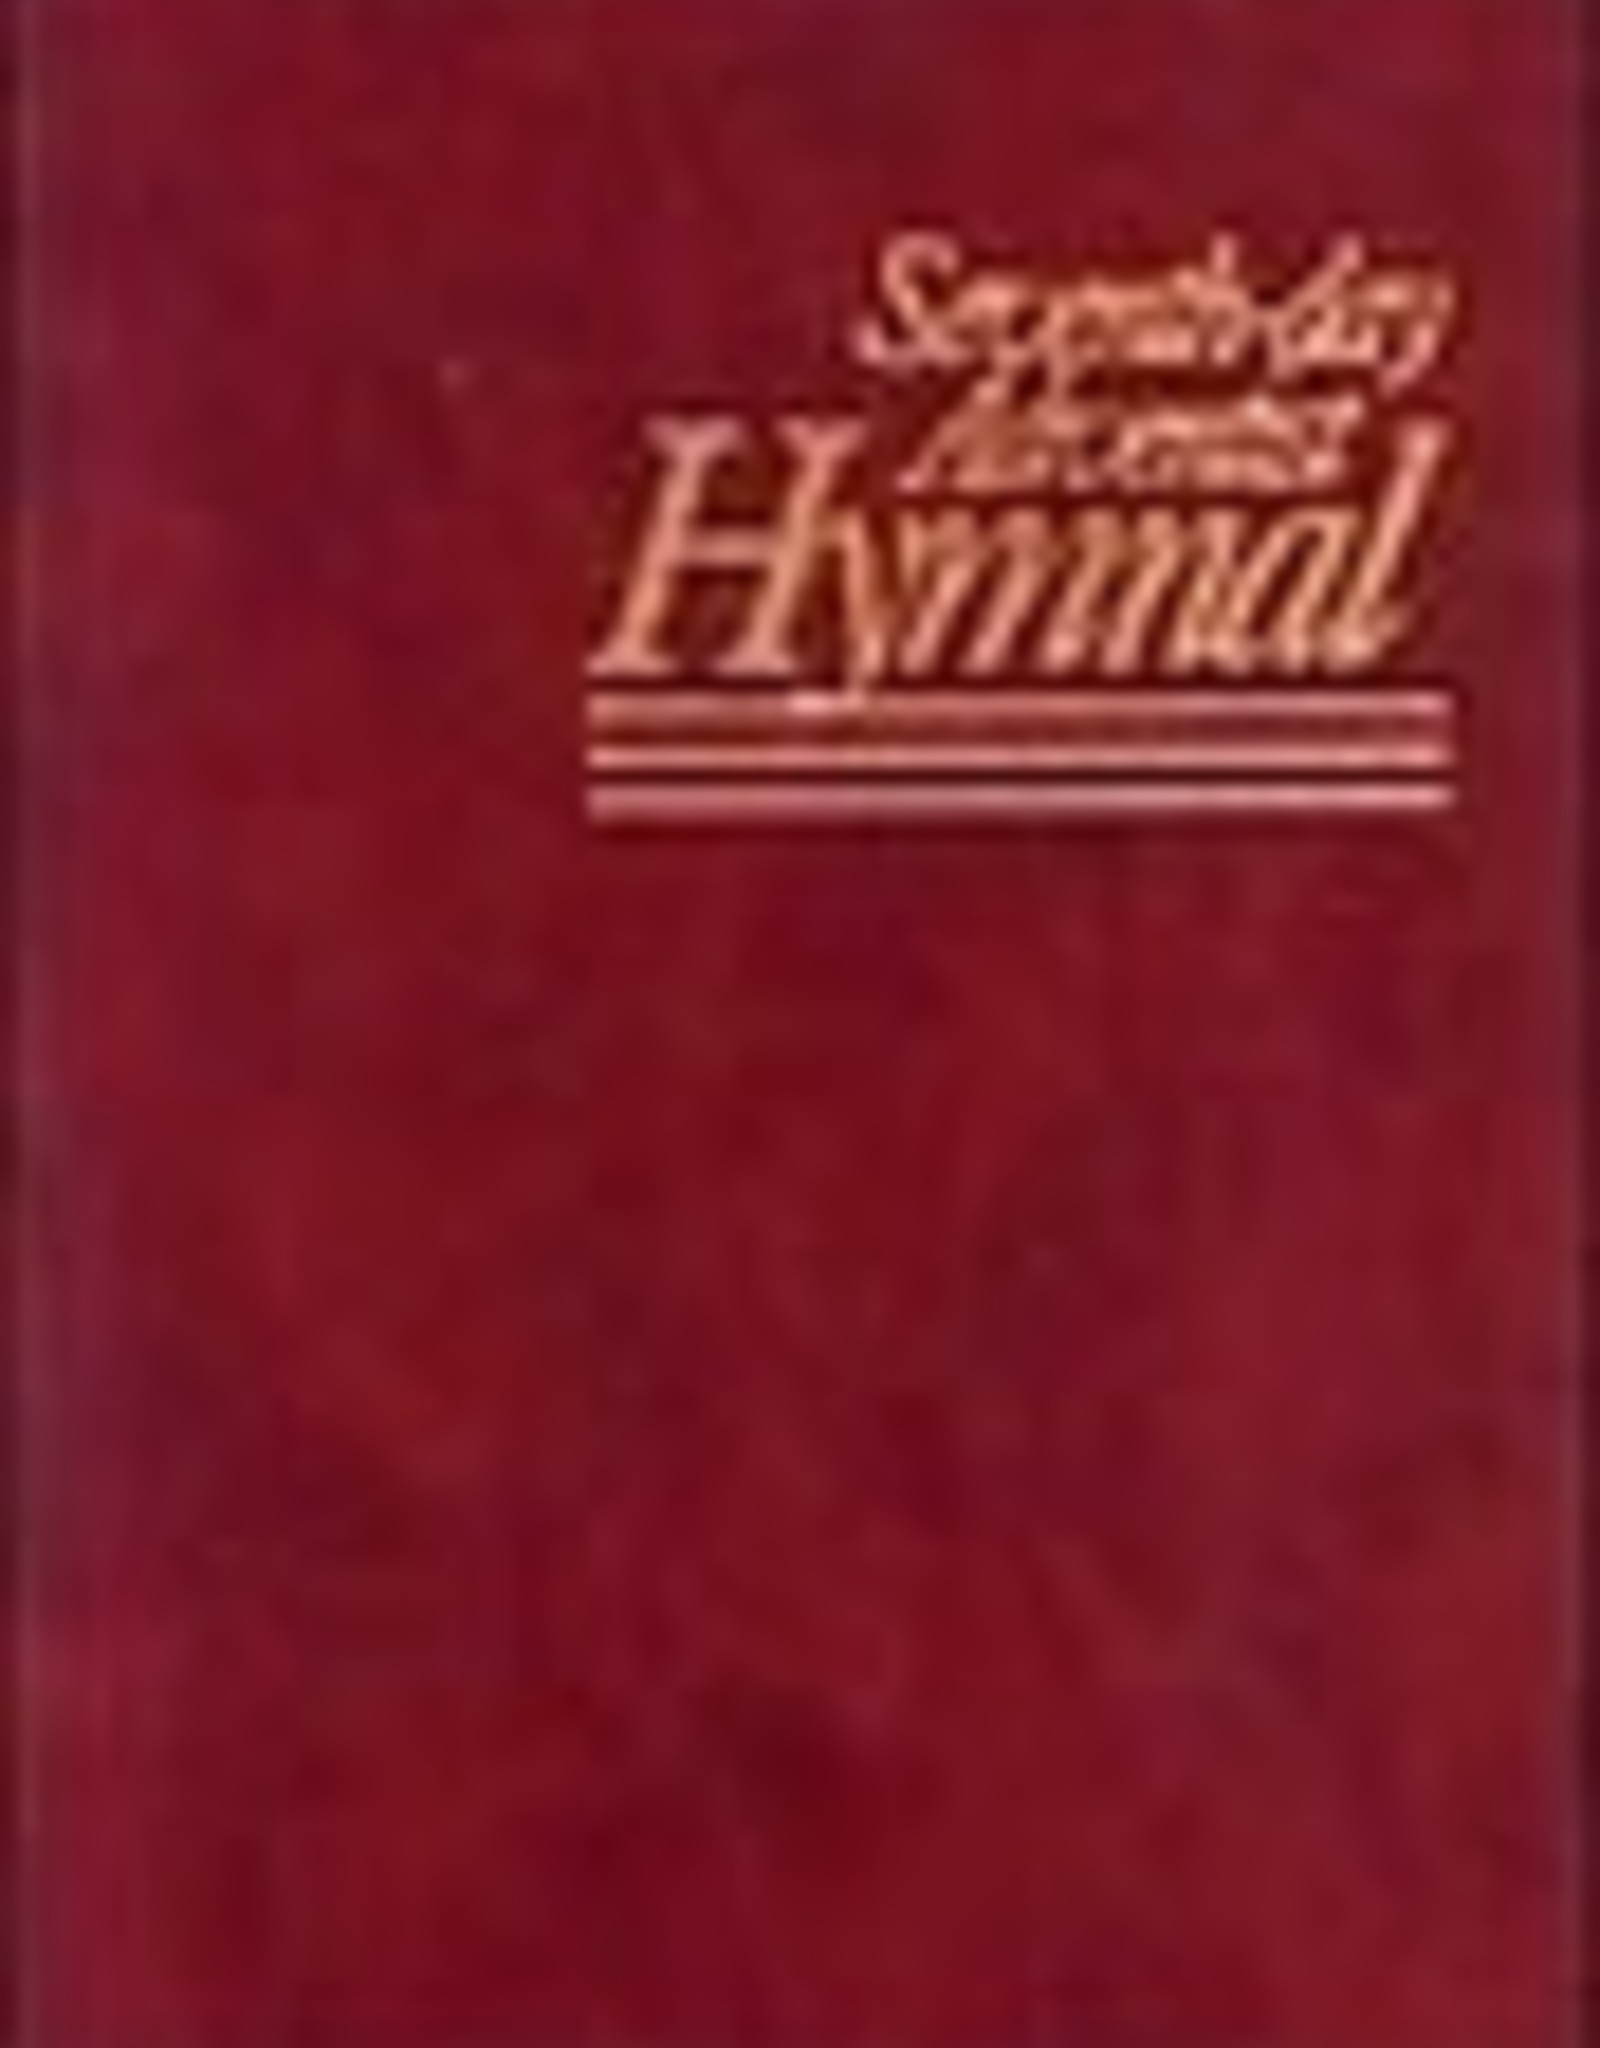 Seventh-Day Adventist Hymnal ( Black Cover)